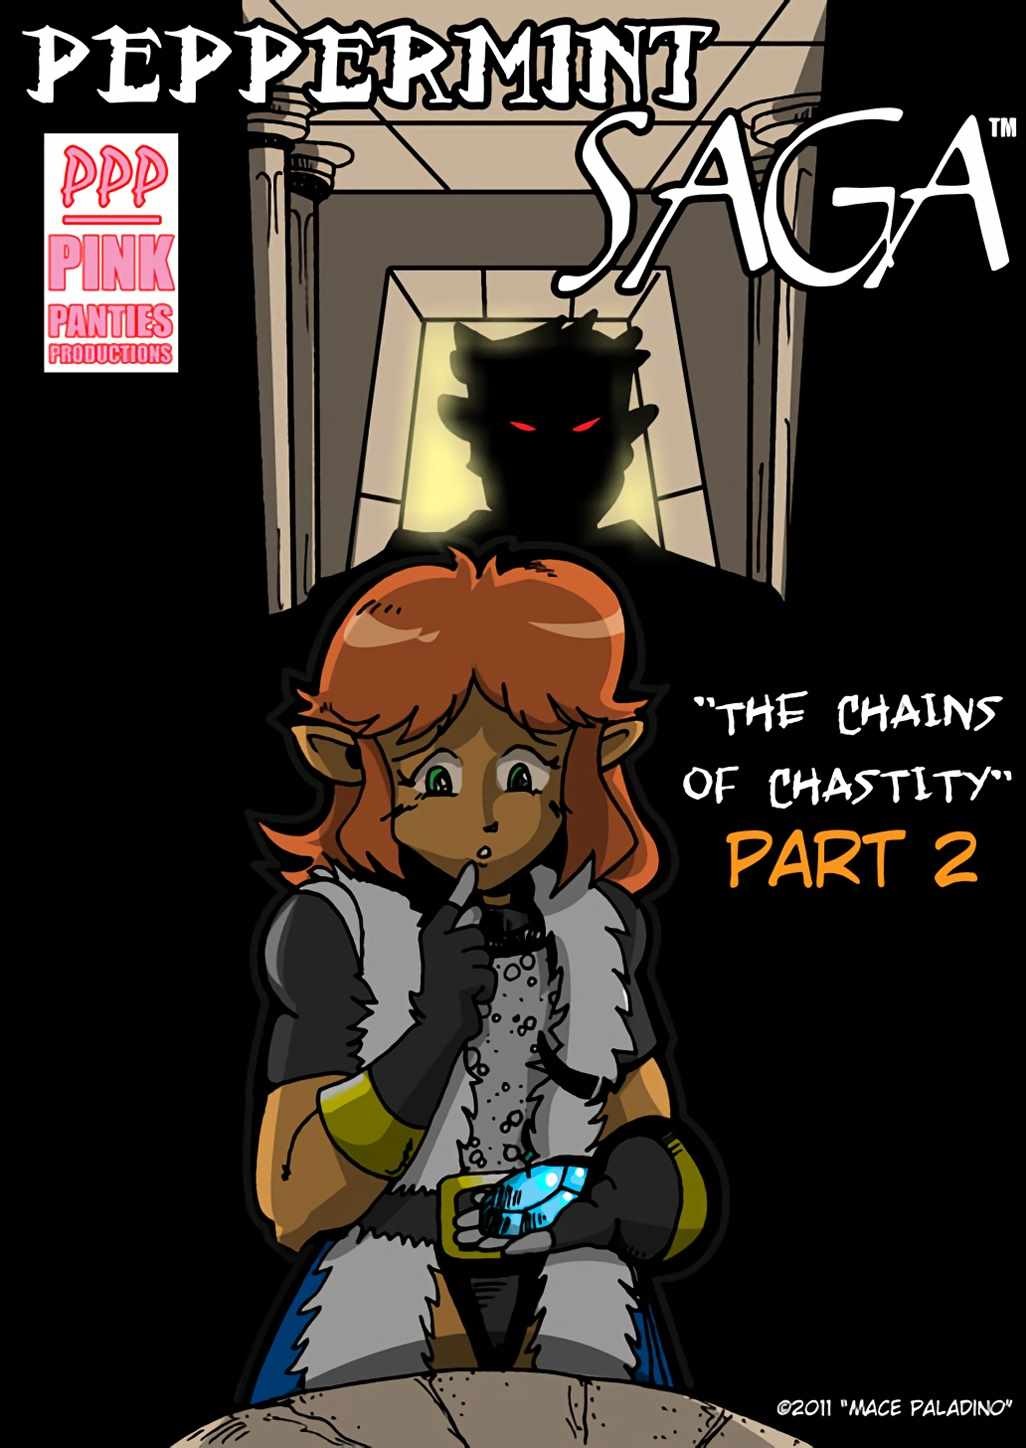 Peppermint Saga #2 - The Chains of Chastity porn comic picture 22